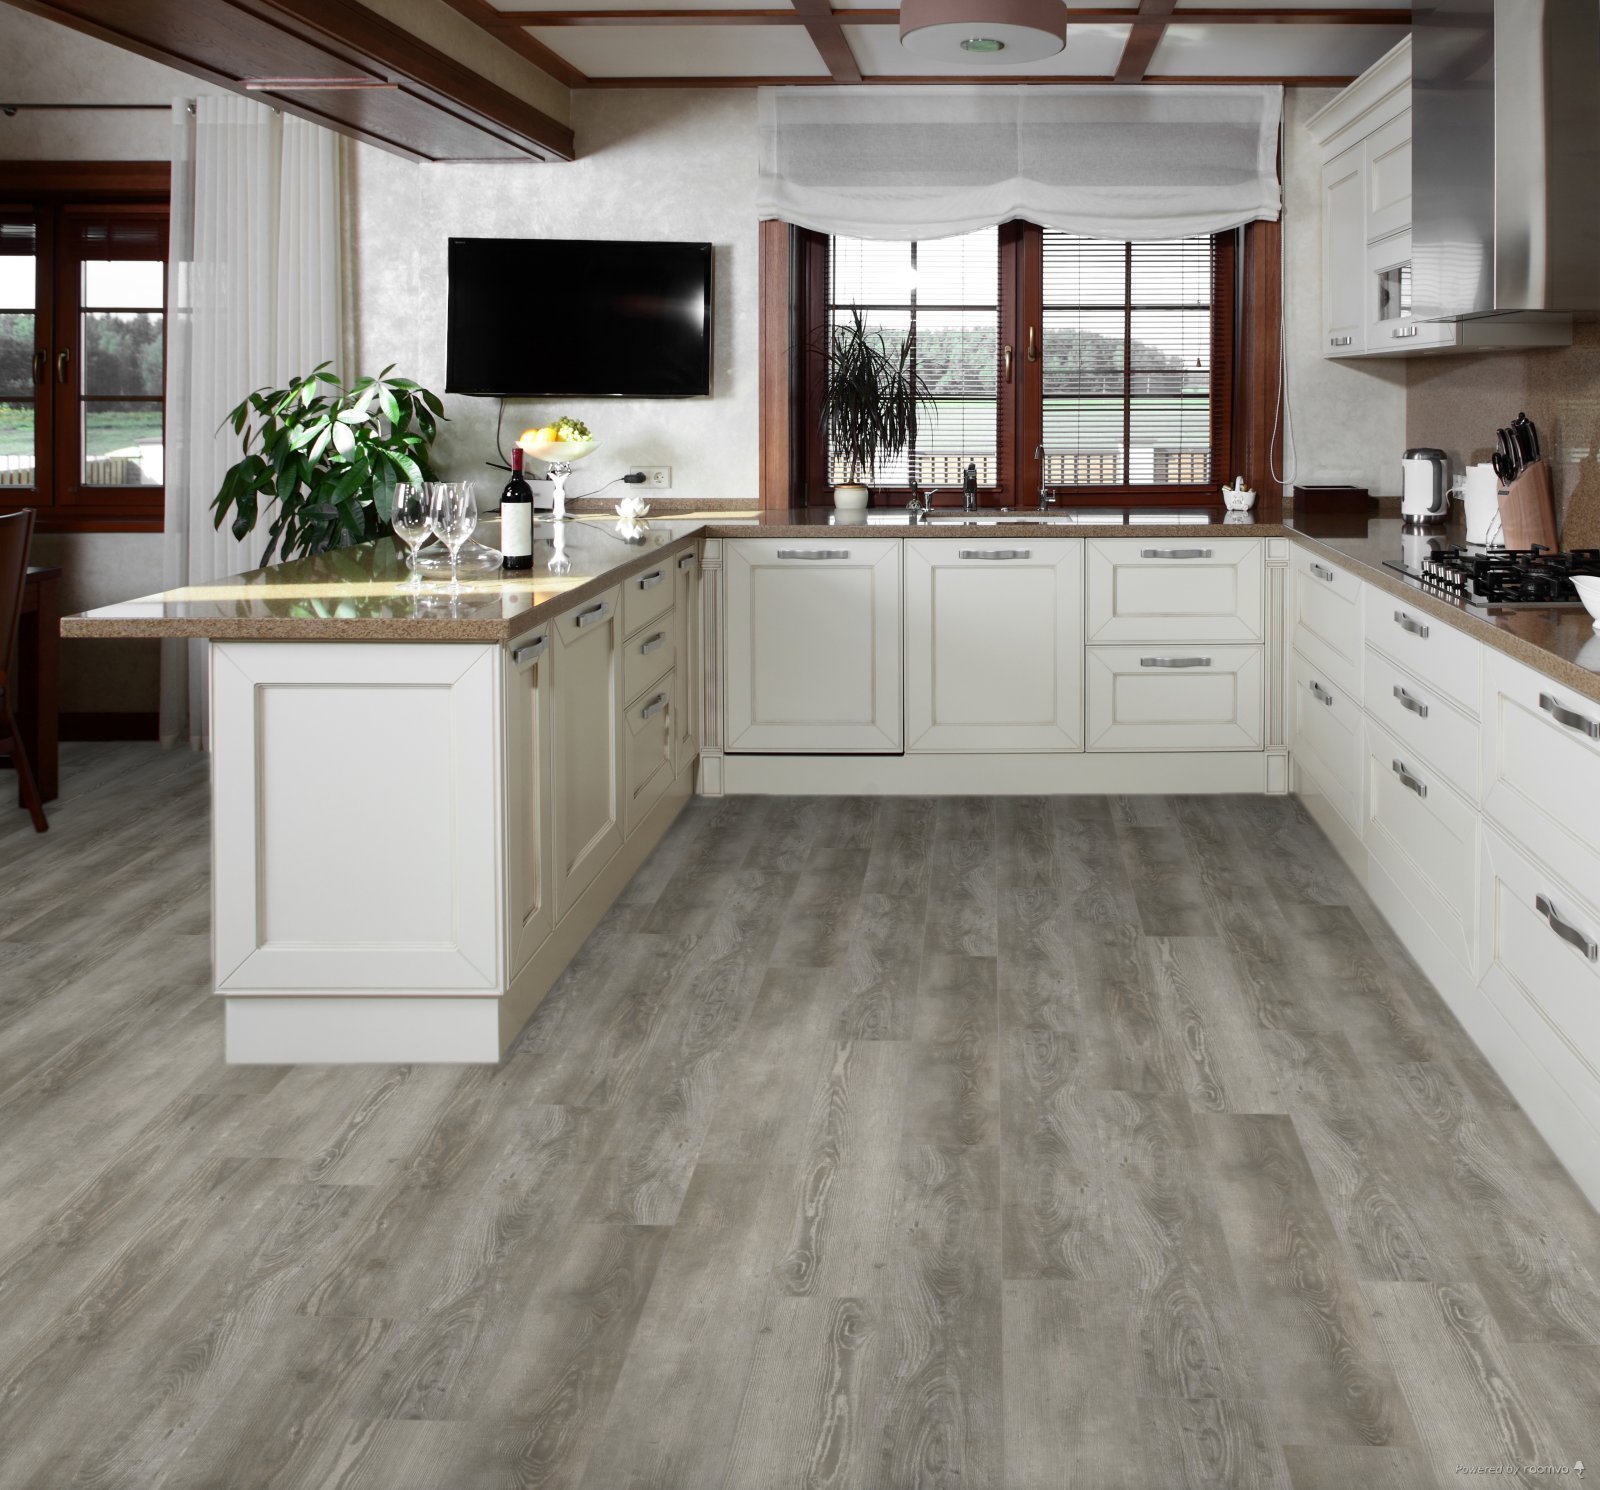 Horizen Flooring presents to you a picture of a quality wide plank Pacific Grove luxury vinyl plank. NovoCore Q Merengue collection features a wide range of colors & designs that will compliment any interior. Natural wood grain synchronized surface allow for an authentic hardwood look & feel. This collection features a 0.3″ / 7.5 mm overall thickness and a durable 22 mil / 0.55 mm wear layer for residential and commercial applications.